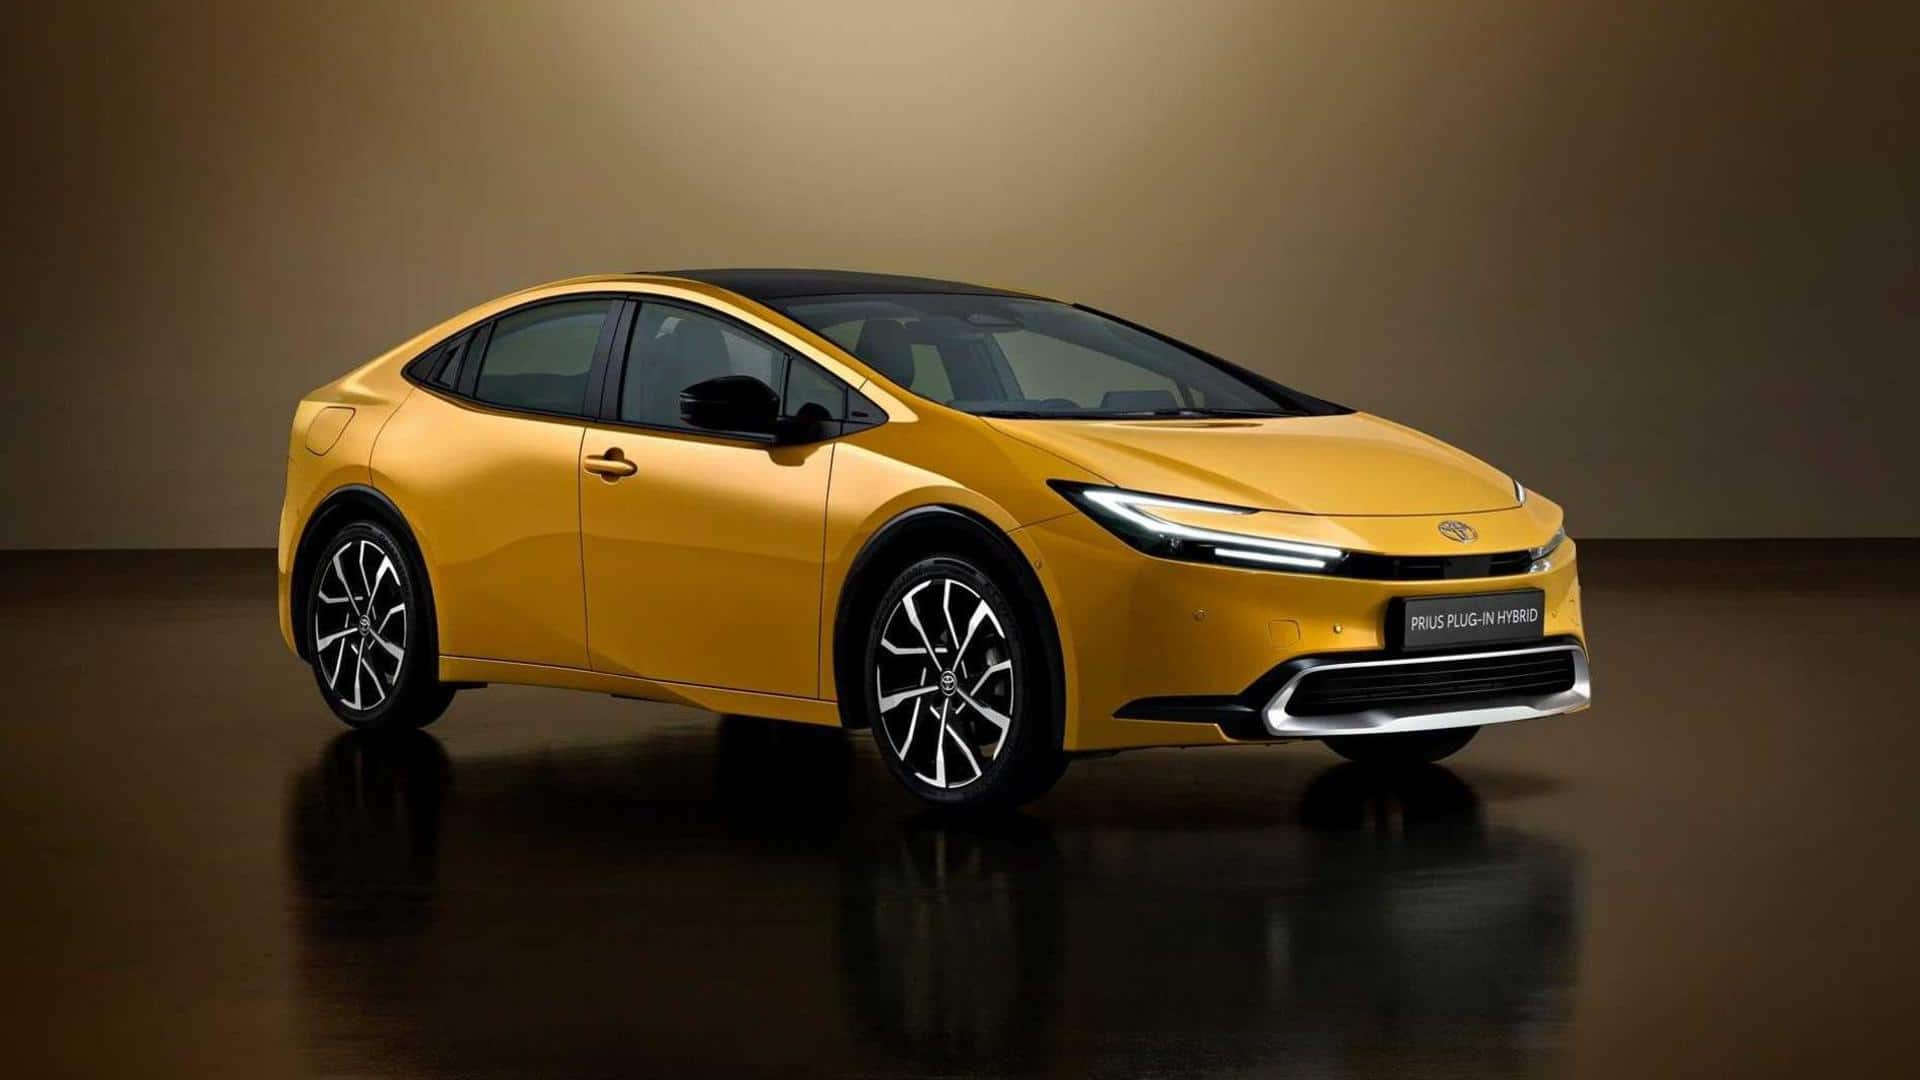 2023 Toyota Prius arrives with meaner looks and greener powertrain